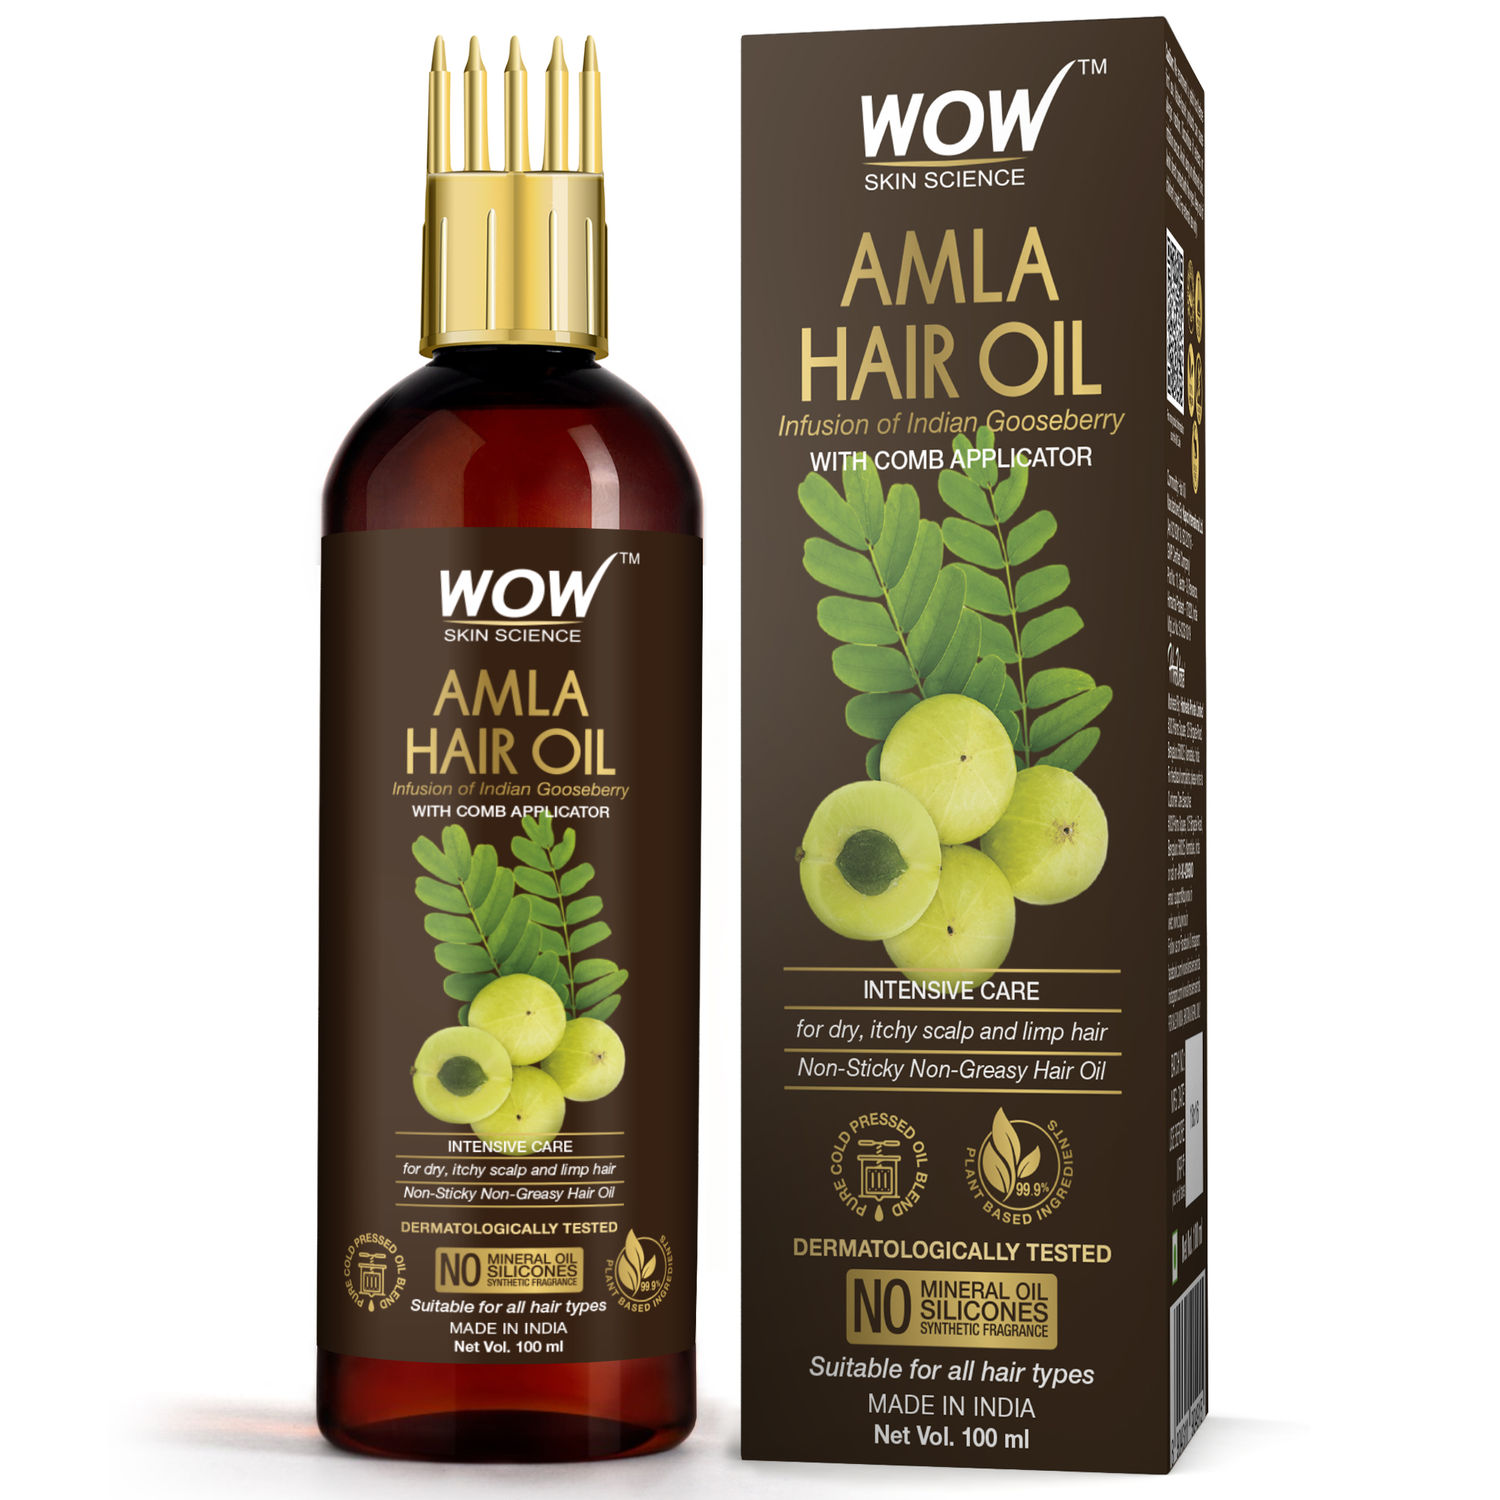 Buy WOW Skin Science Amla Hair Oil - Pure Cold Pressed Indian Gooseberry Oil - Intensive Hair Care - with Comb Applicator - Non-Sticky & Non-Greasy - No Mineral Oil, Silicones, Synthetic Fragrance - 100mL - Purplle